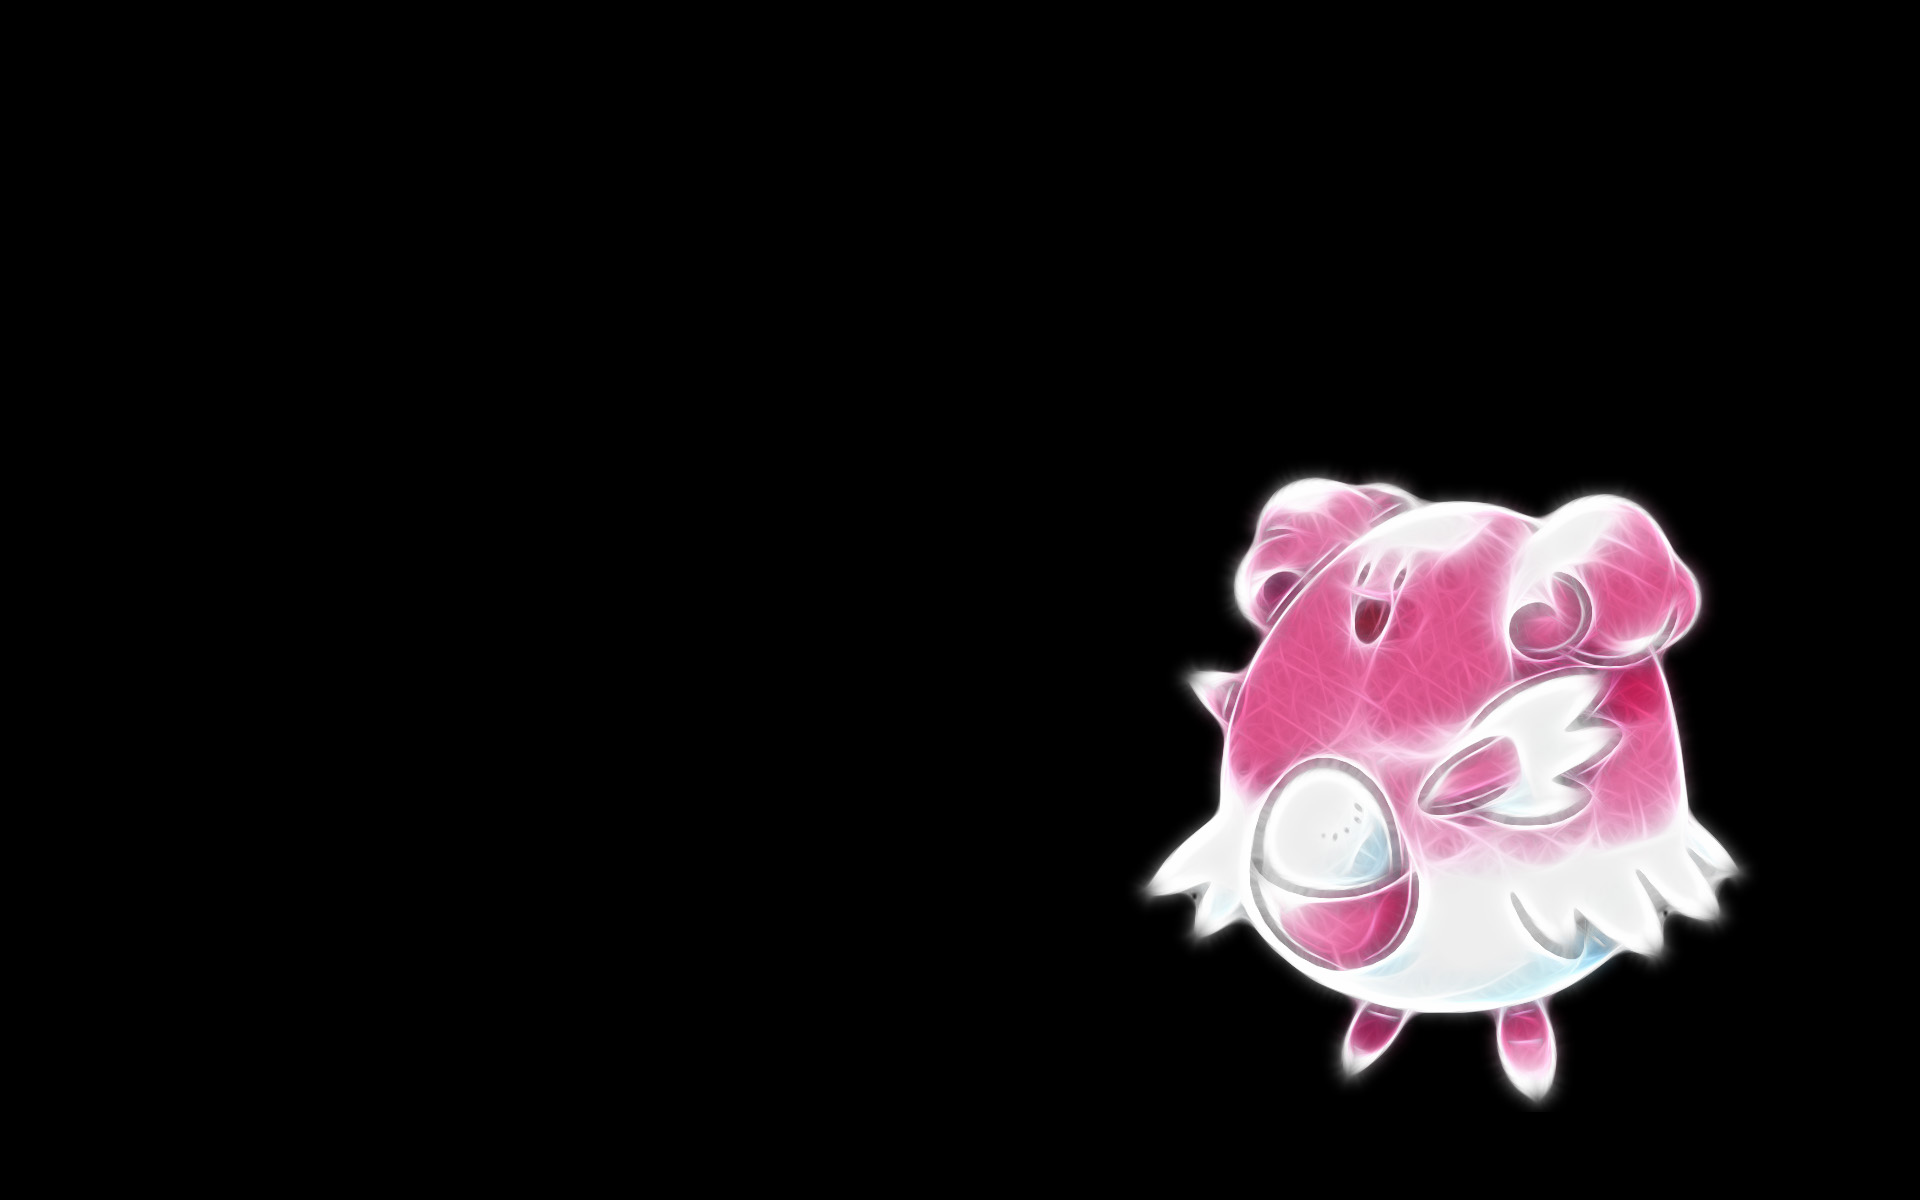 Blissey, a pink and white Pokémon from the anime, is featured as a desktop wallpaper on the screen.